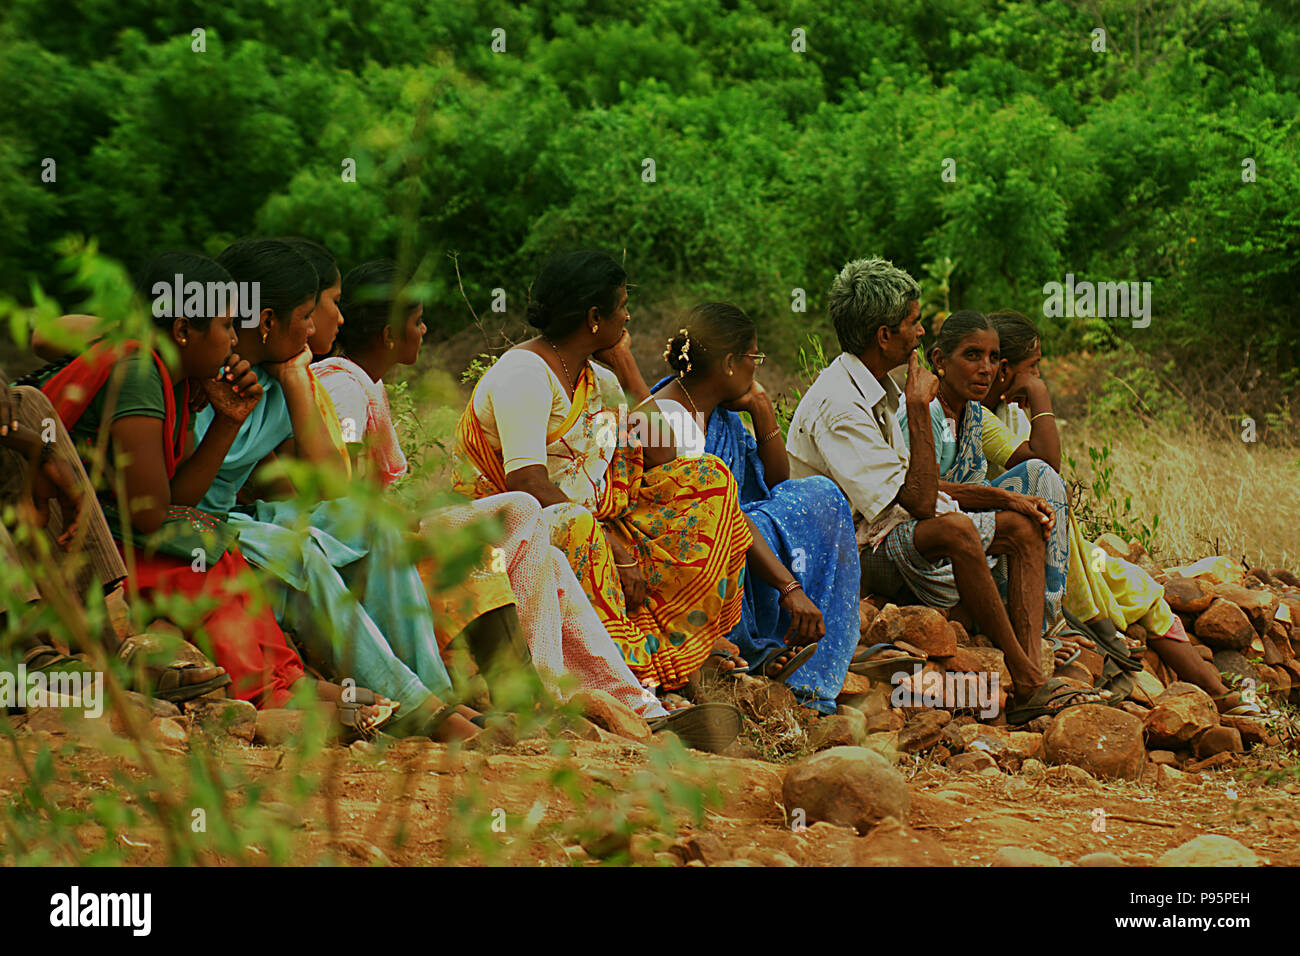 Indian farmer people sitting outside on paddy field, nature background Stock Photo